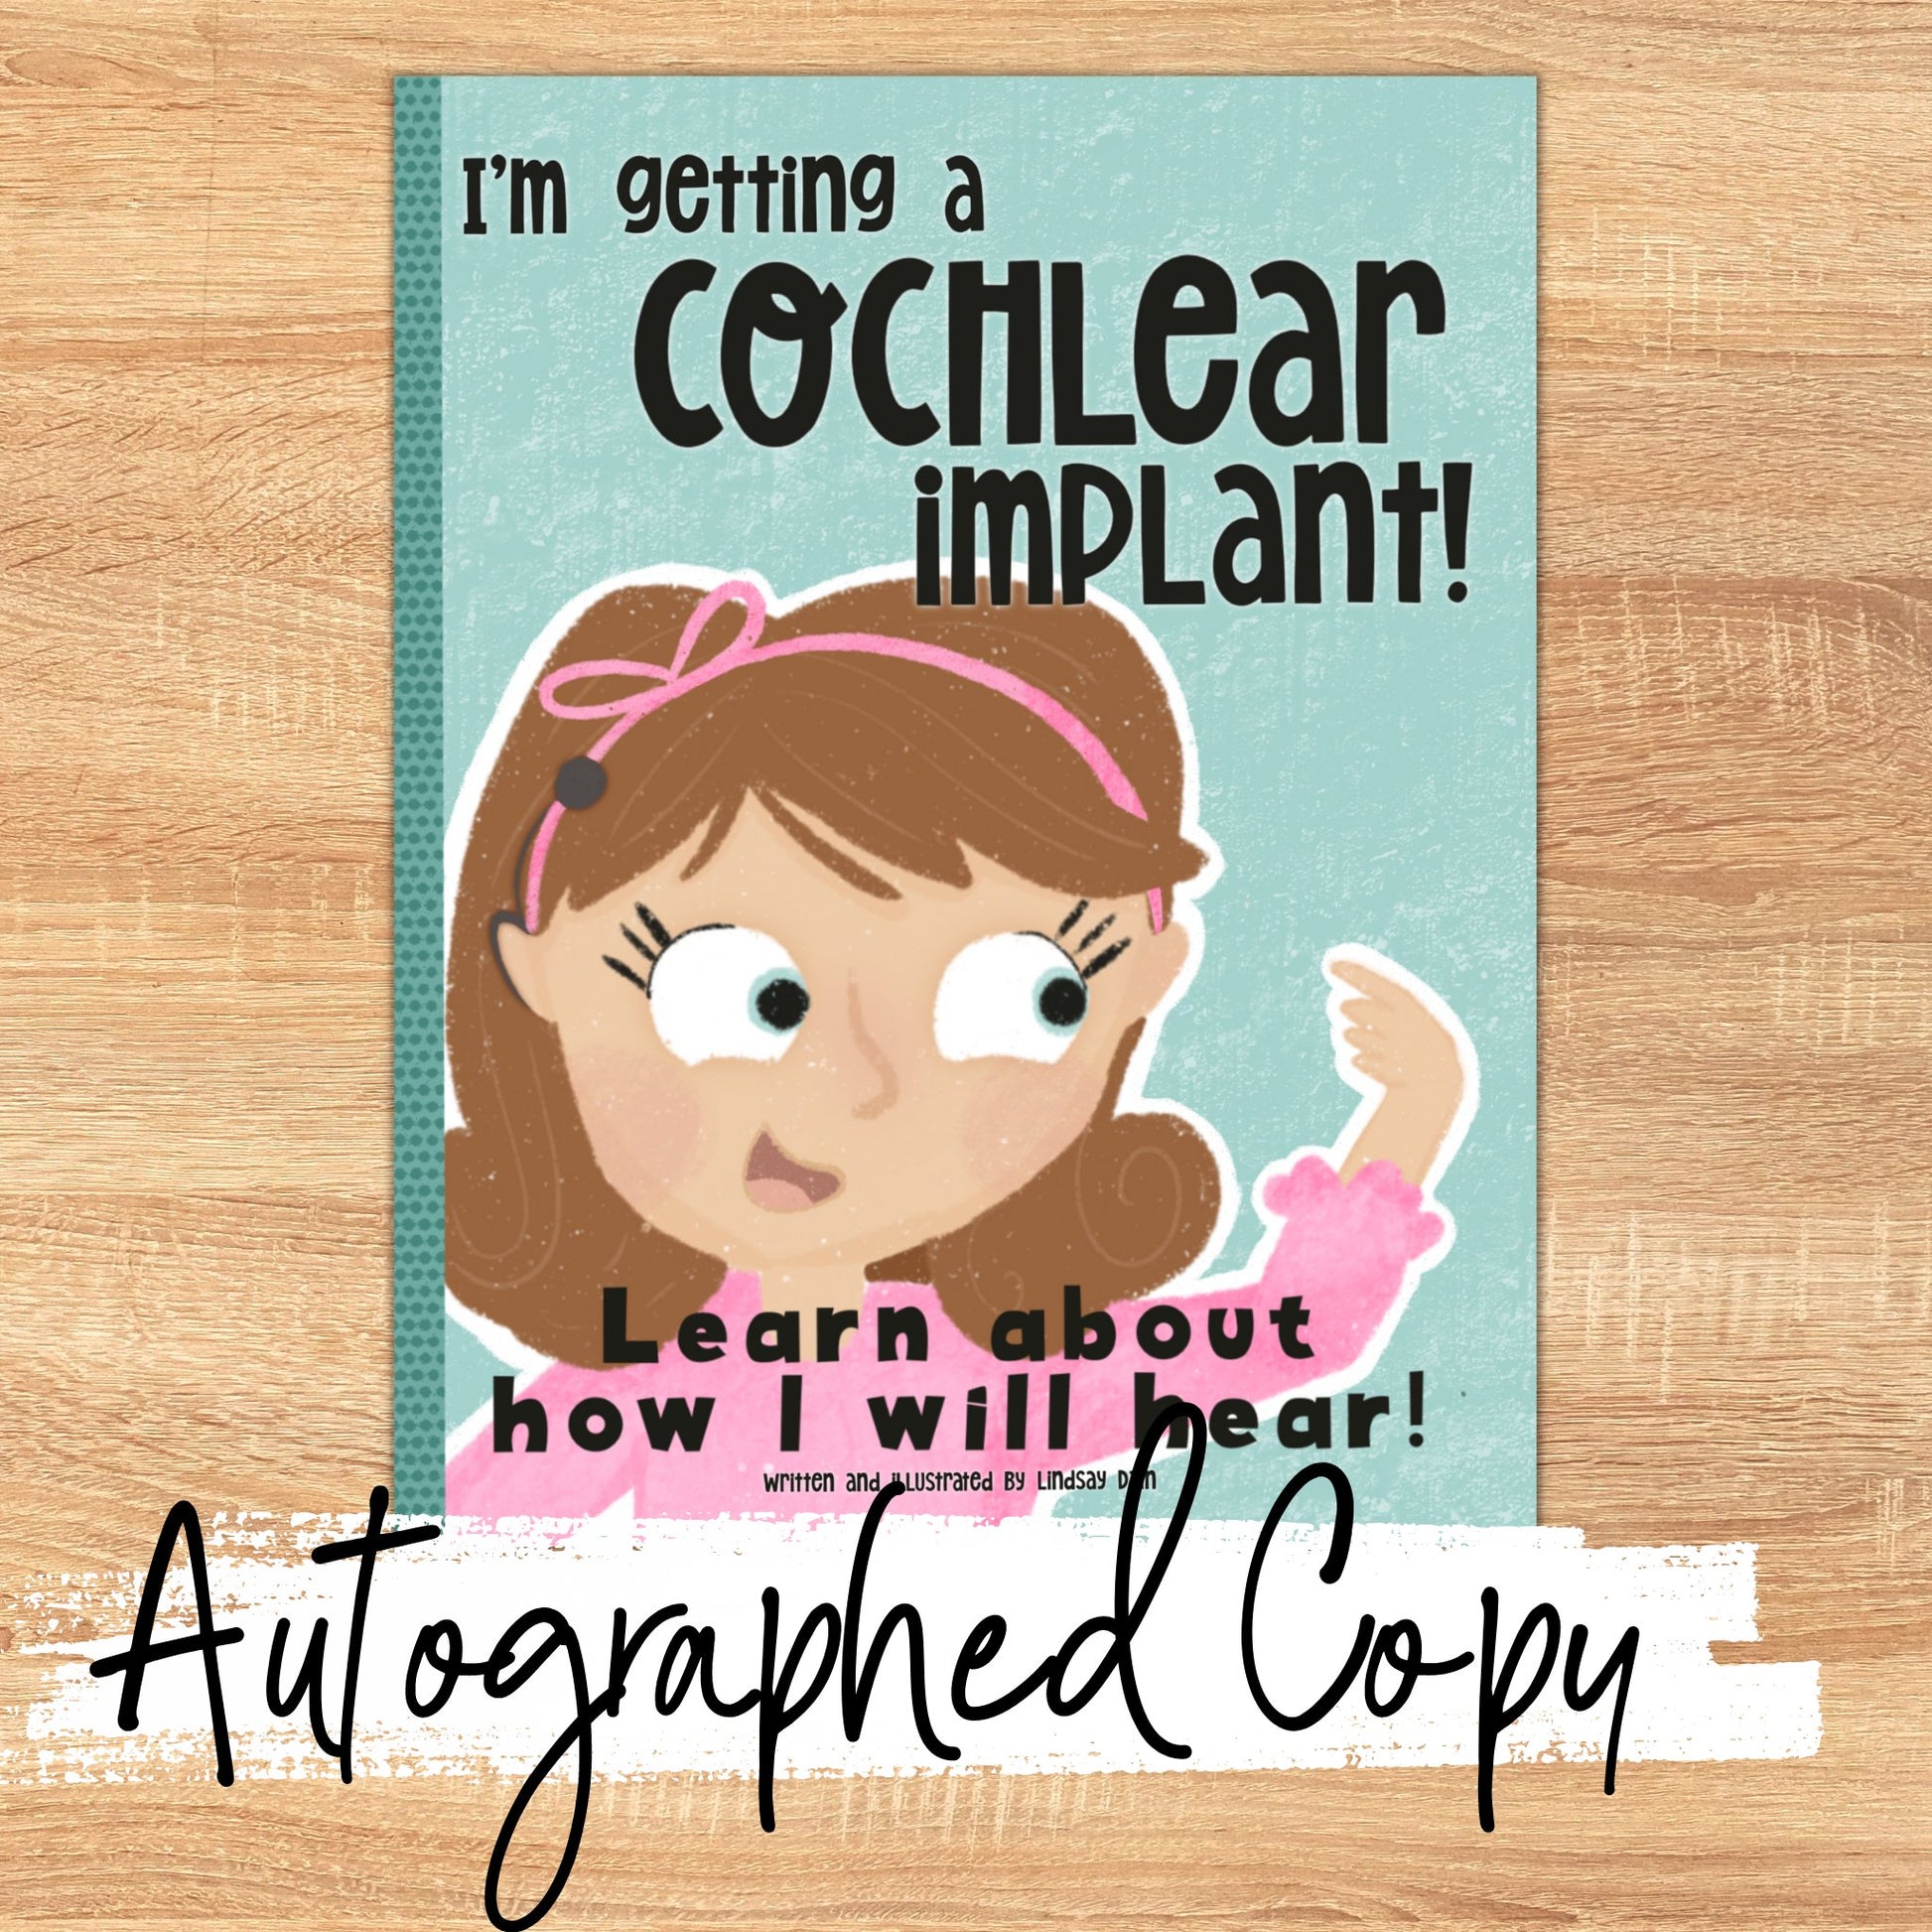 Autographed copy cover example of the children’s picture book called “I’m Getting a Cochlear Implant: Learn About How I Will Hear” that was self-published through Amazon’s Kindle Direct Publishing.